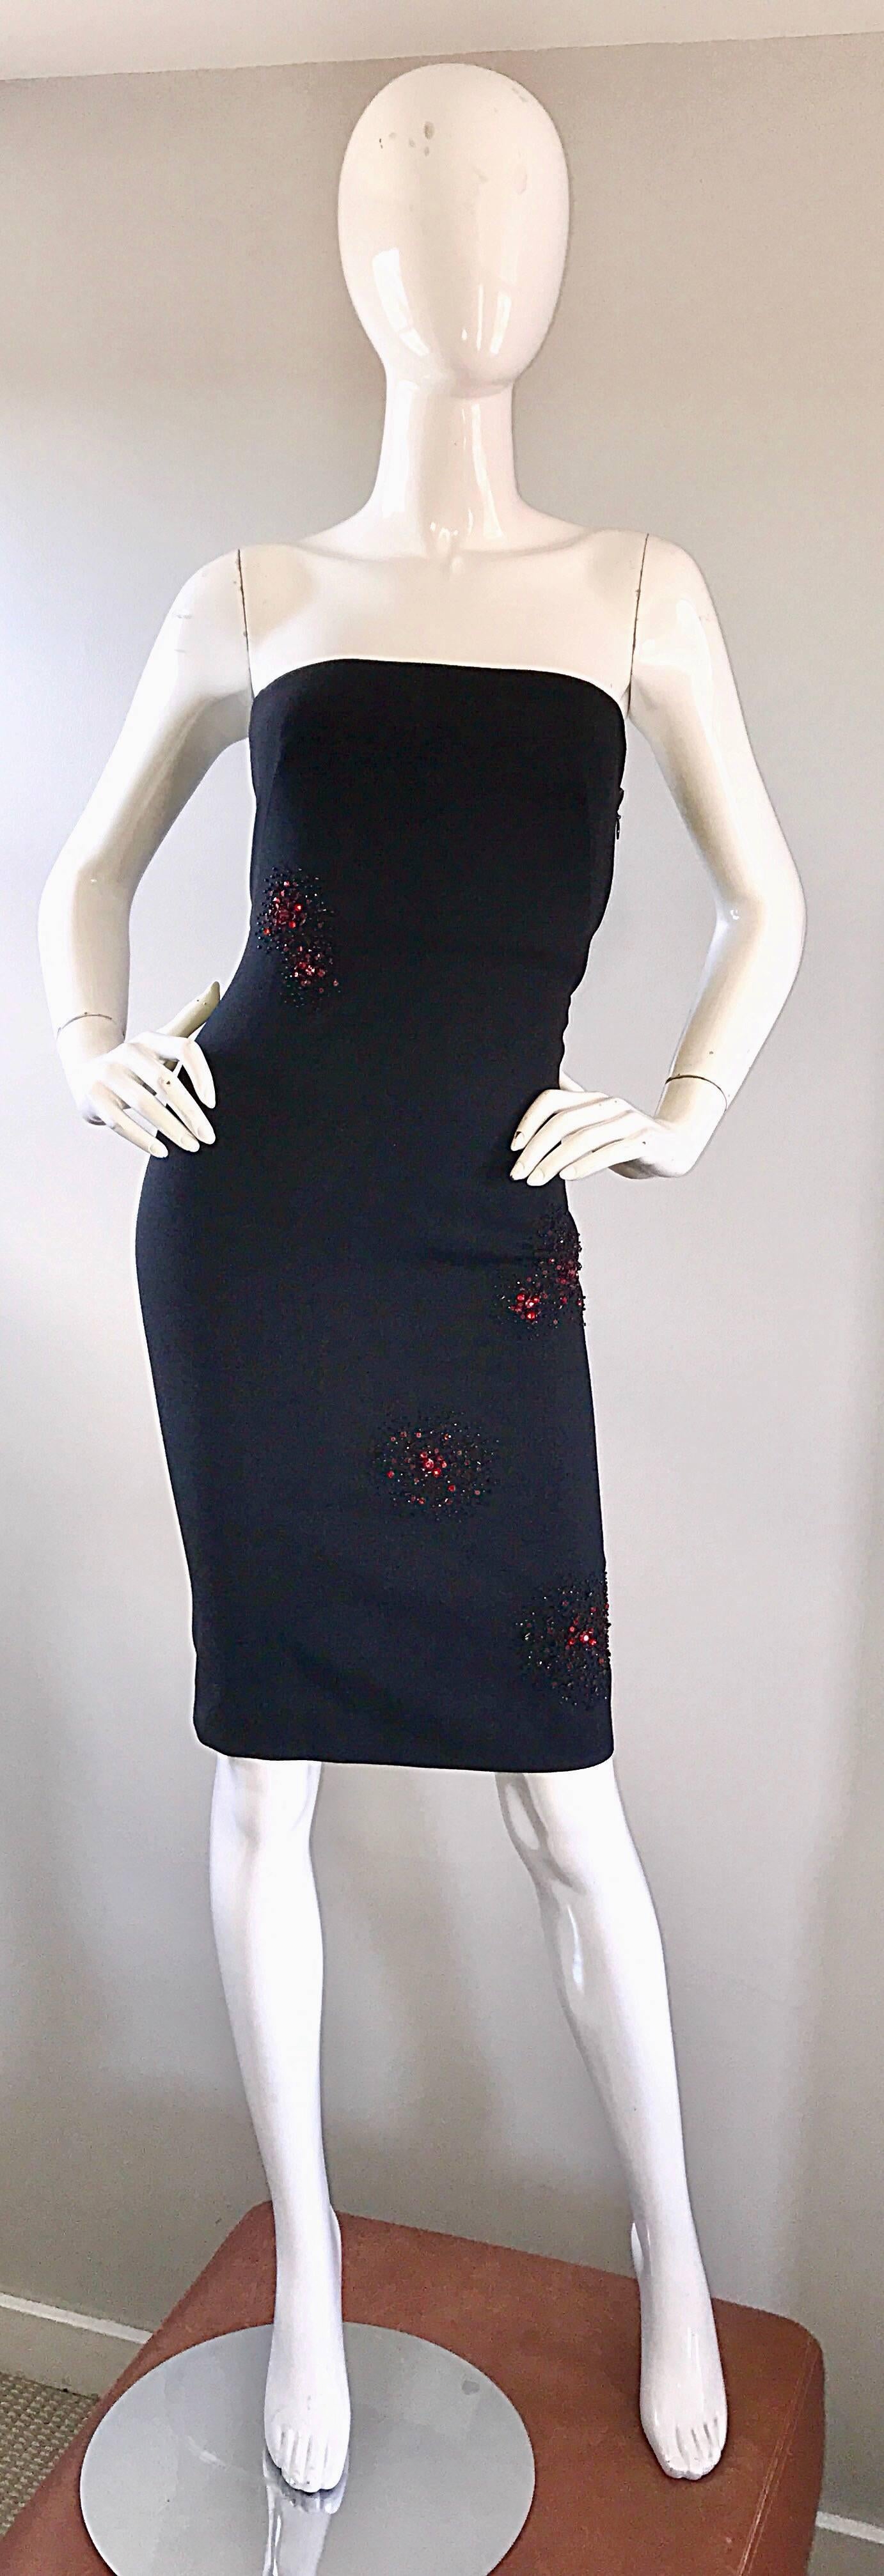 Sexy vintage early 90s GIANNI VERSACE COUTURE black wool and silk bodcon strapless dress! Features black and red crystals, sequins and beads in clusters throughout. Impeccably constructed, with heavy attention to details. Boned bodice keeps